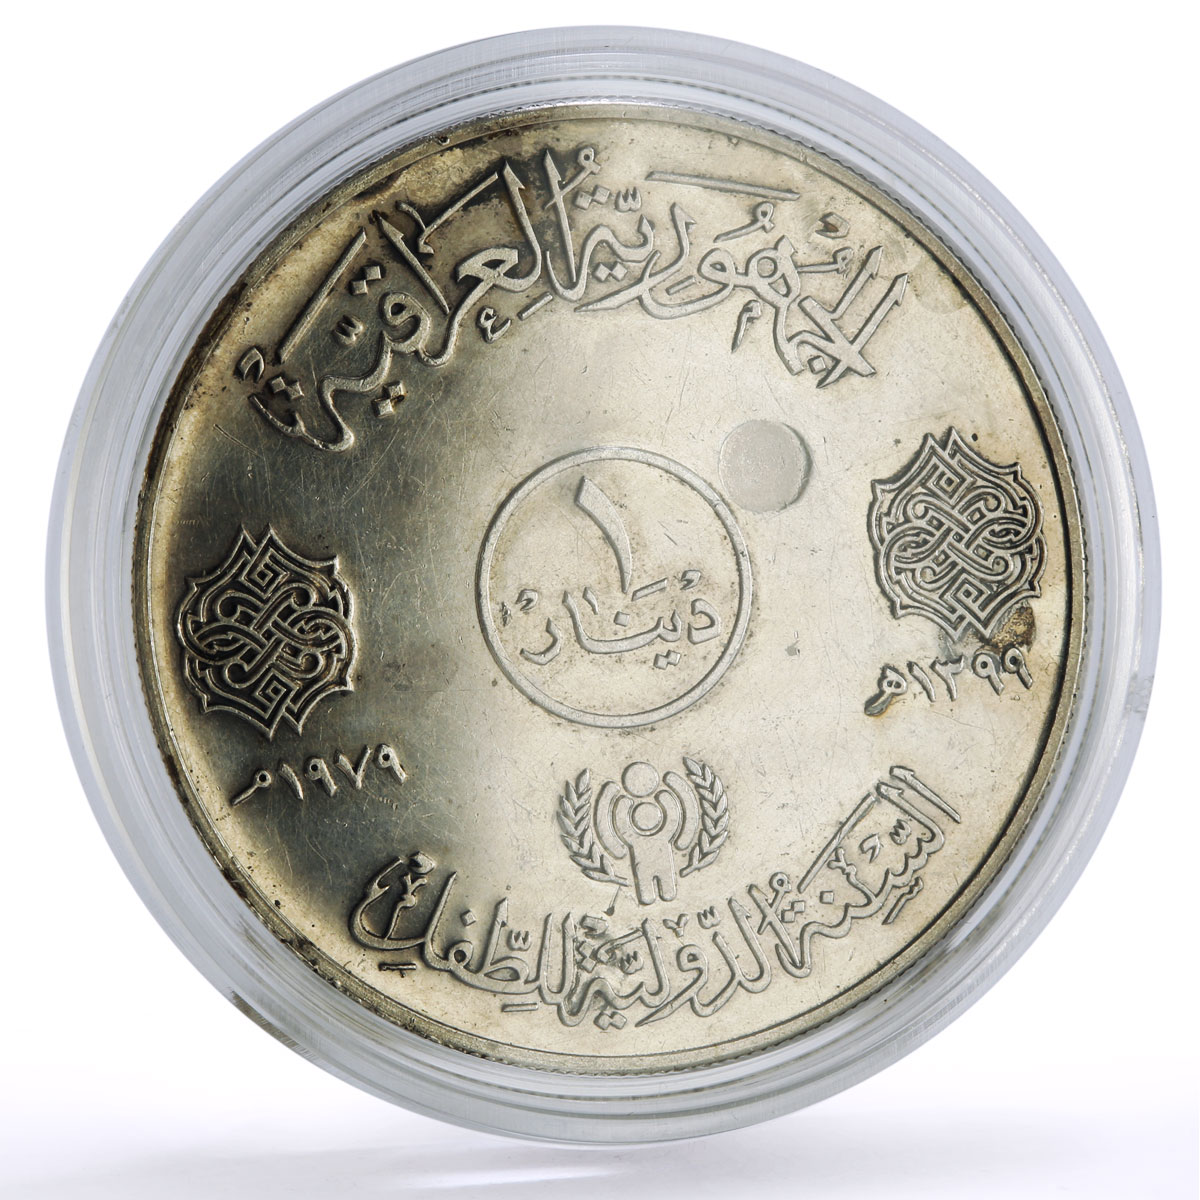 Iraq 1 dinar UNICEF Save the Children Child Year KM-145 proof silver coin 1979